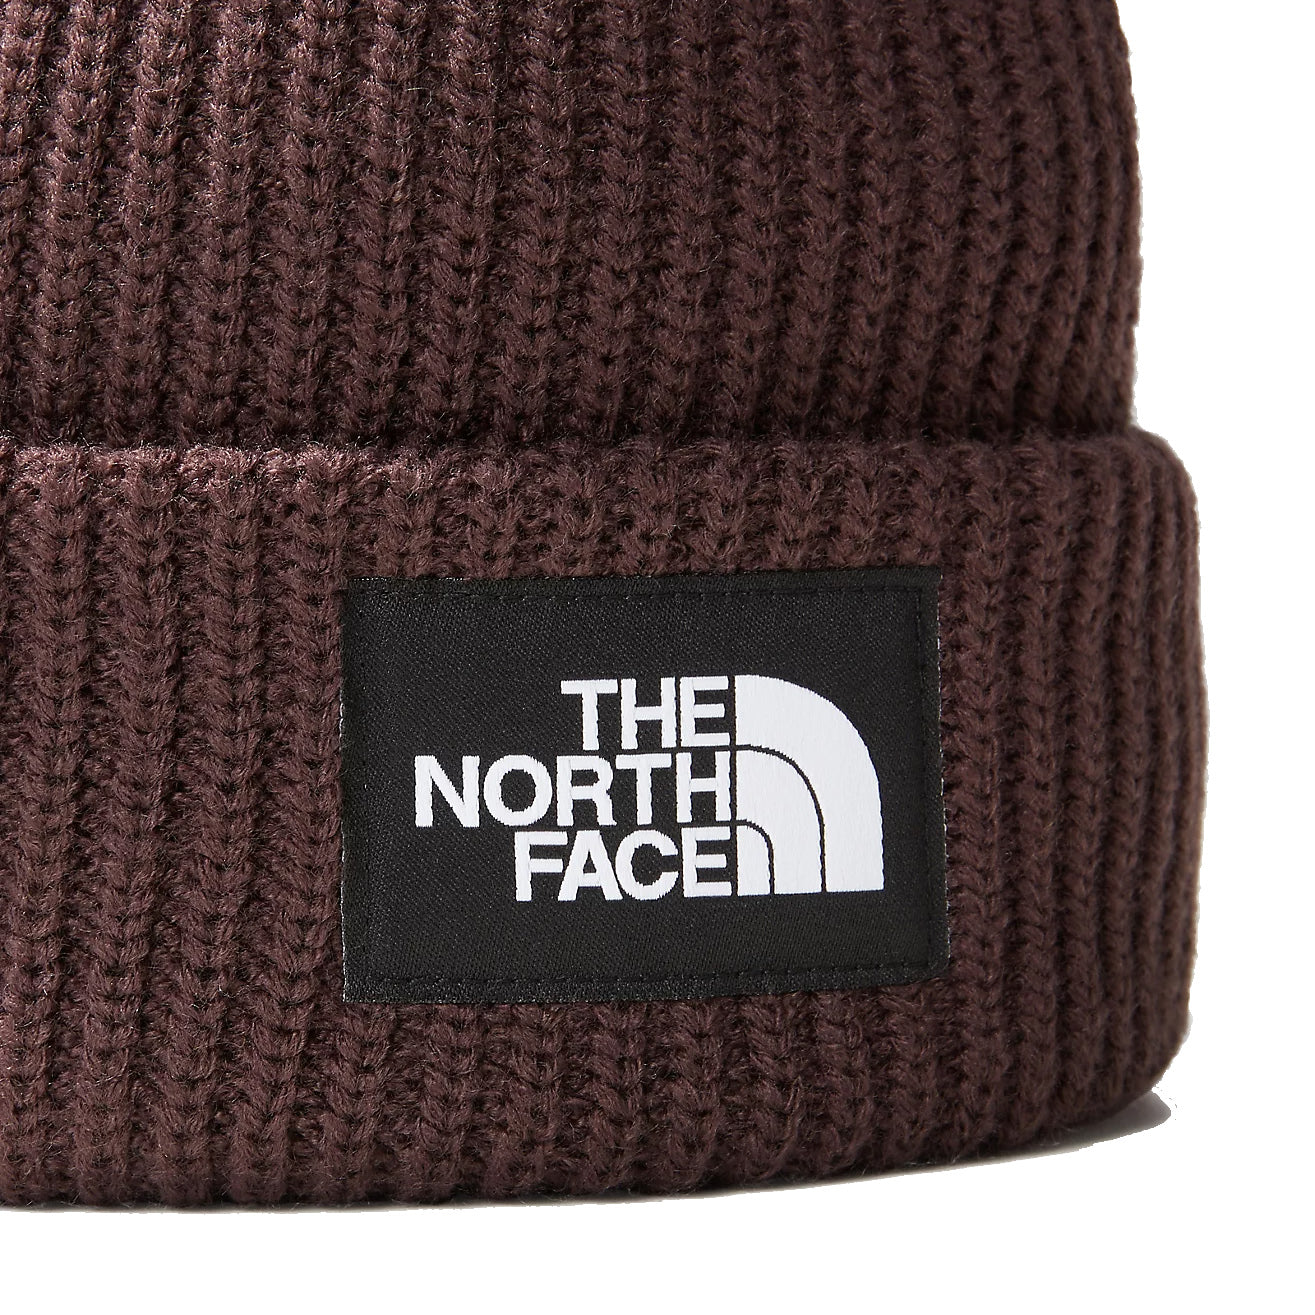 The North Face Salty Dog Beanie Brown